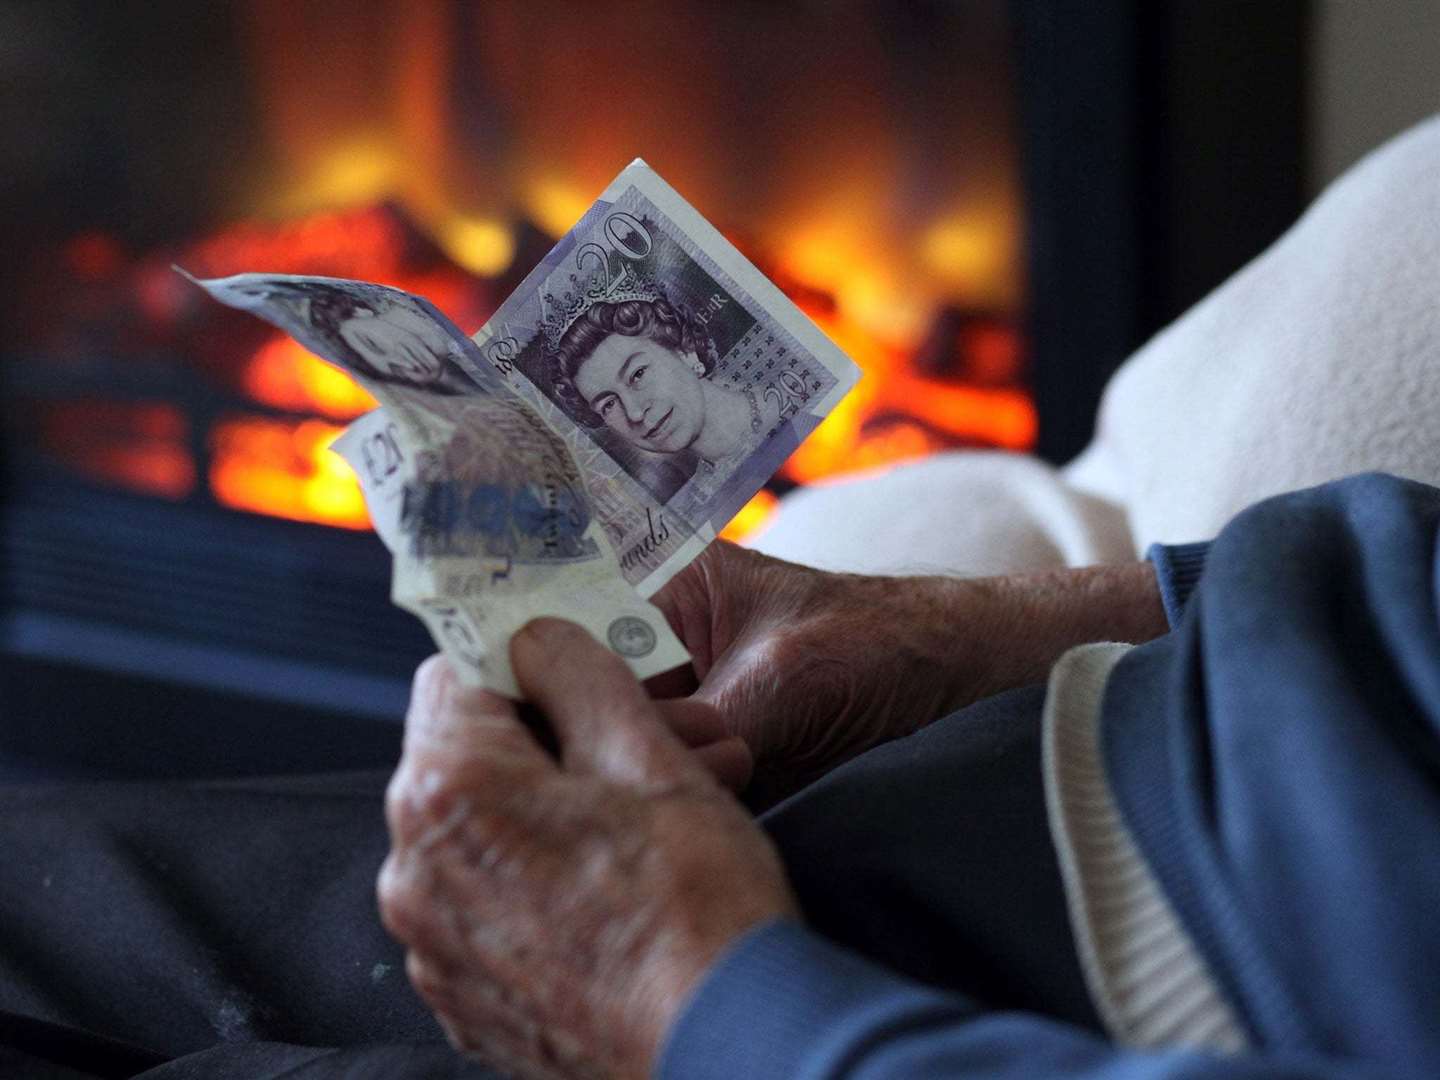 A survey by Age Scotland found 94 per cent of respondents were worried about paying their energy bills from next month.